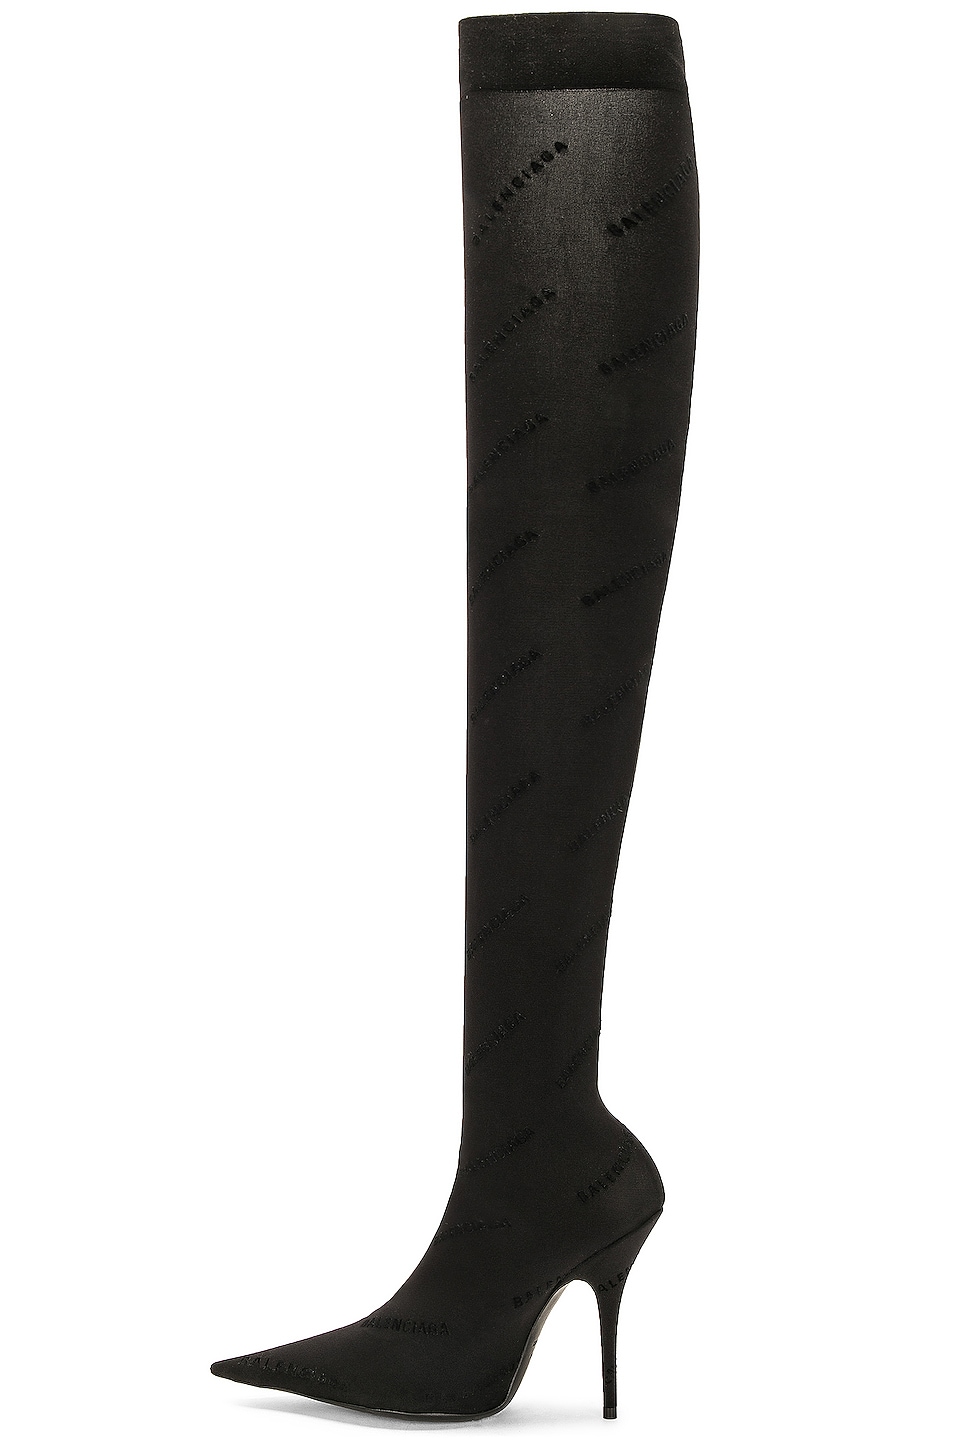 Balenciaga Naked Over the Knee Boot in Black | FWRD